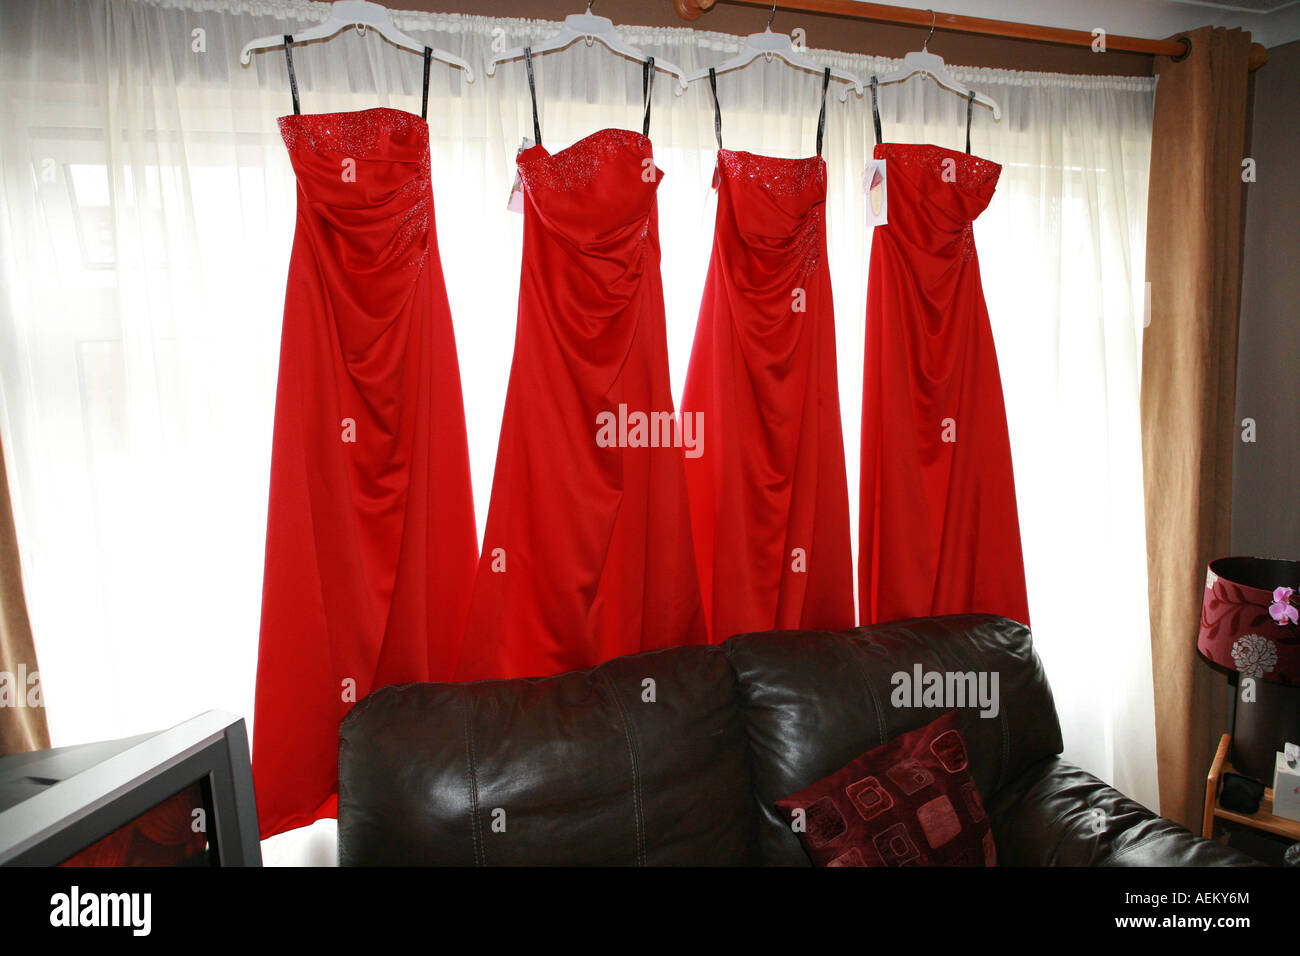 Four 4 bright red brides maids dresses hanging from a window in a house on a wedding day morning UK Stock Photo